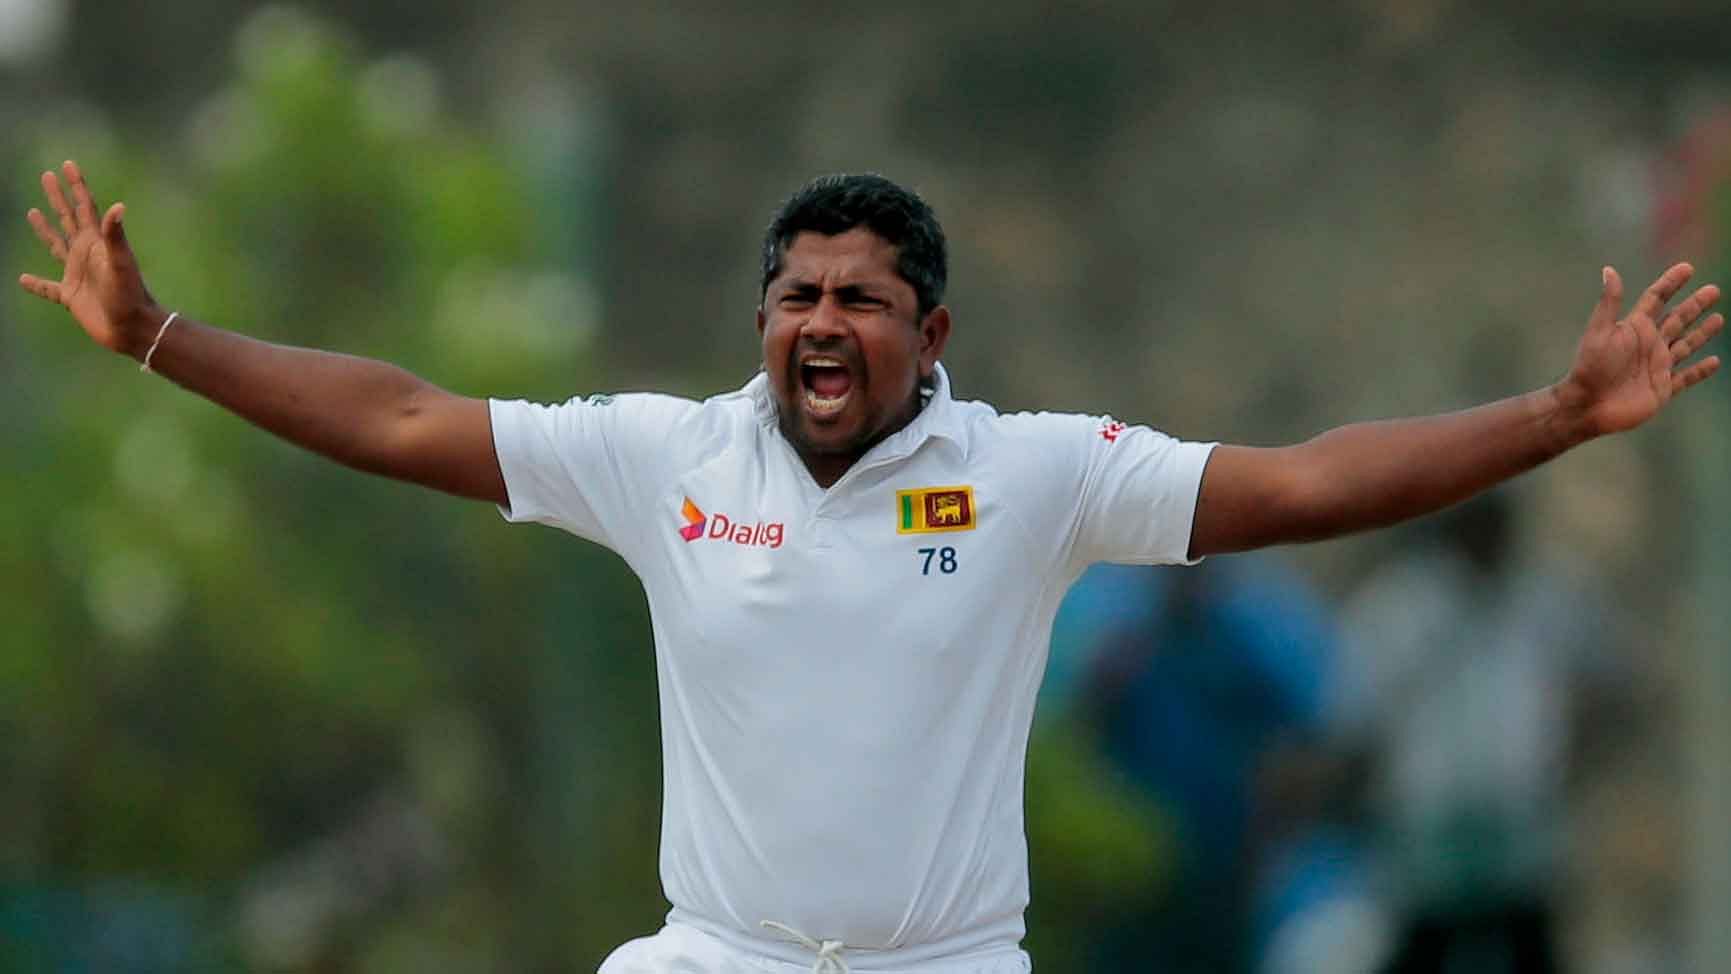 Rangana Herath now holds the world record as the left arm spinner with the most Test wickets. (Photo: AP)